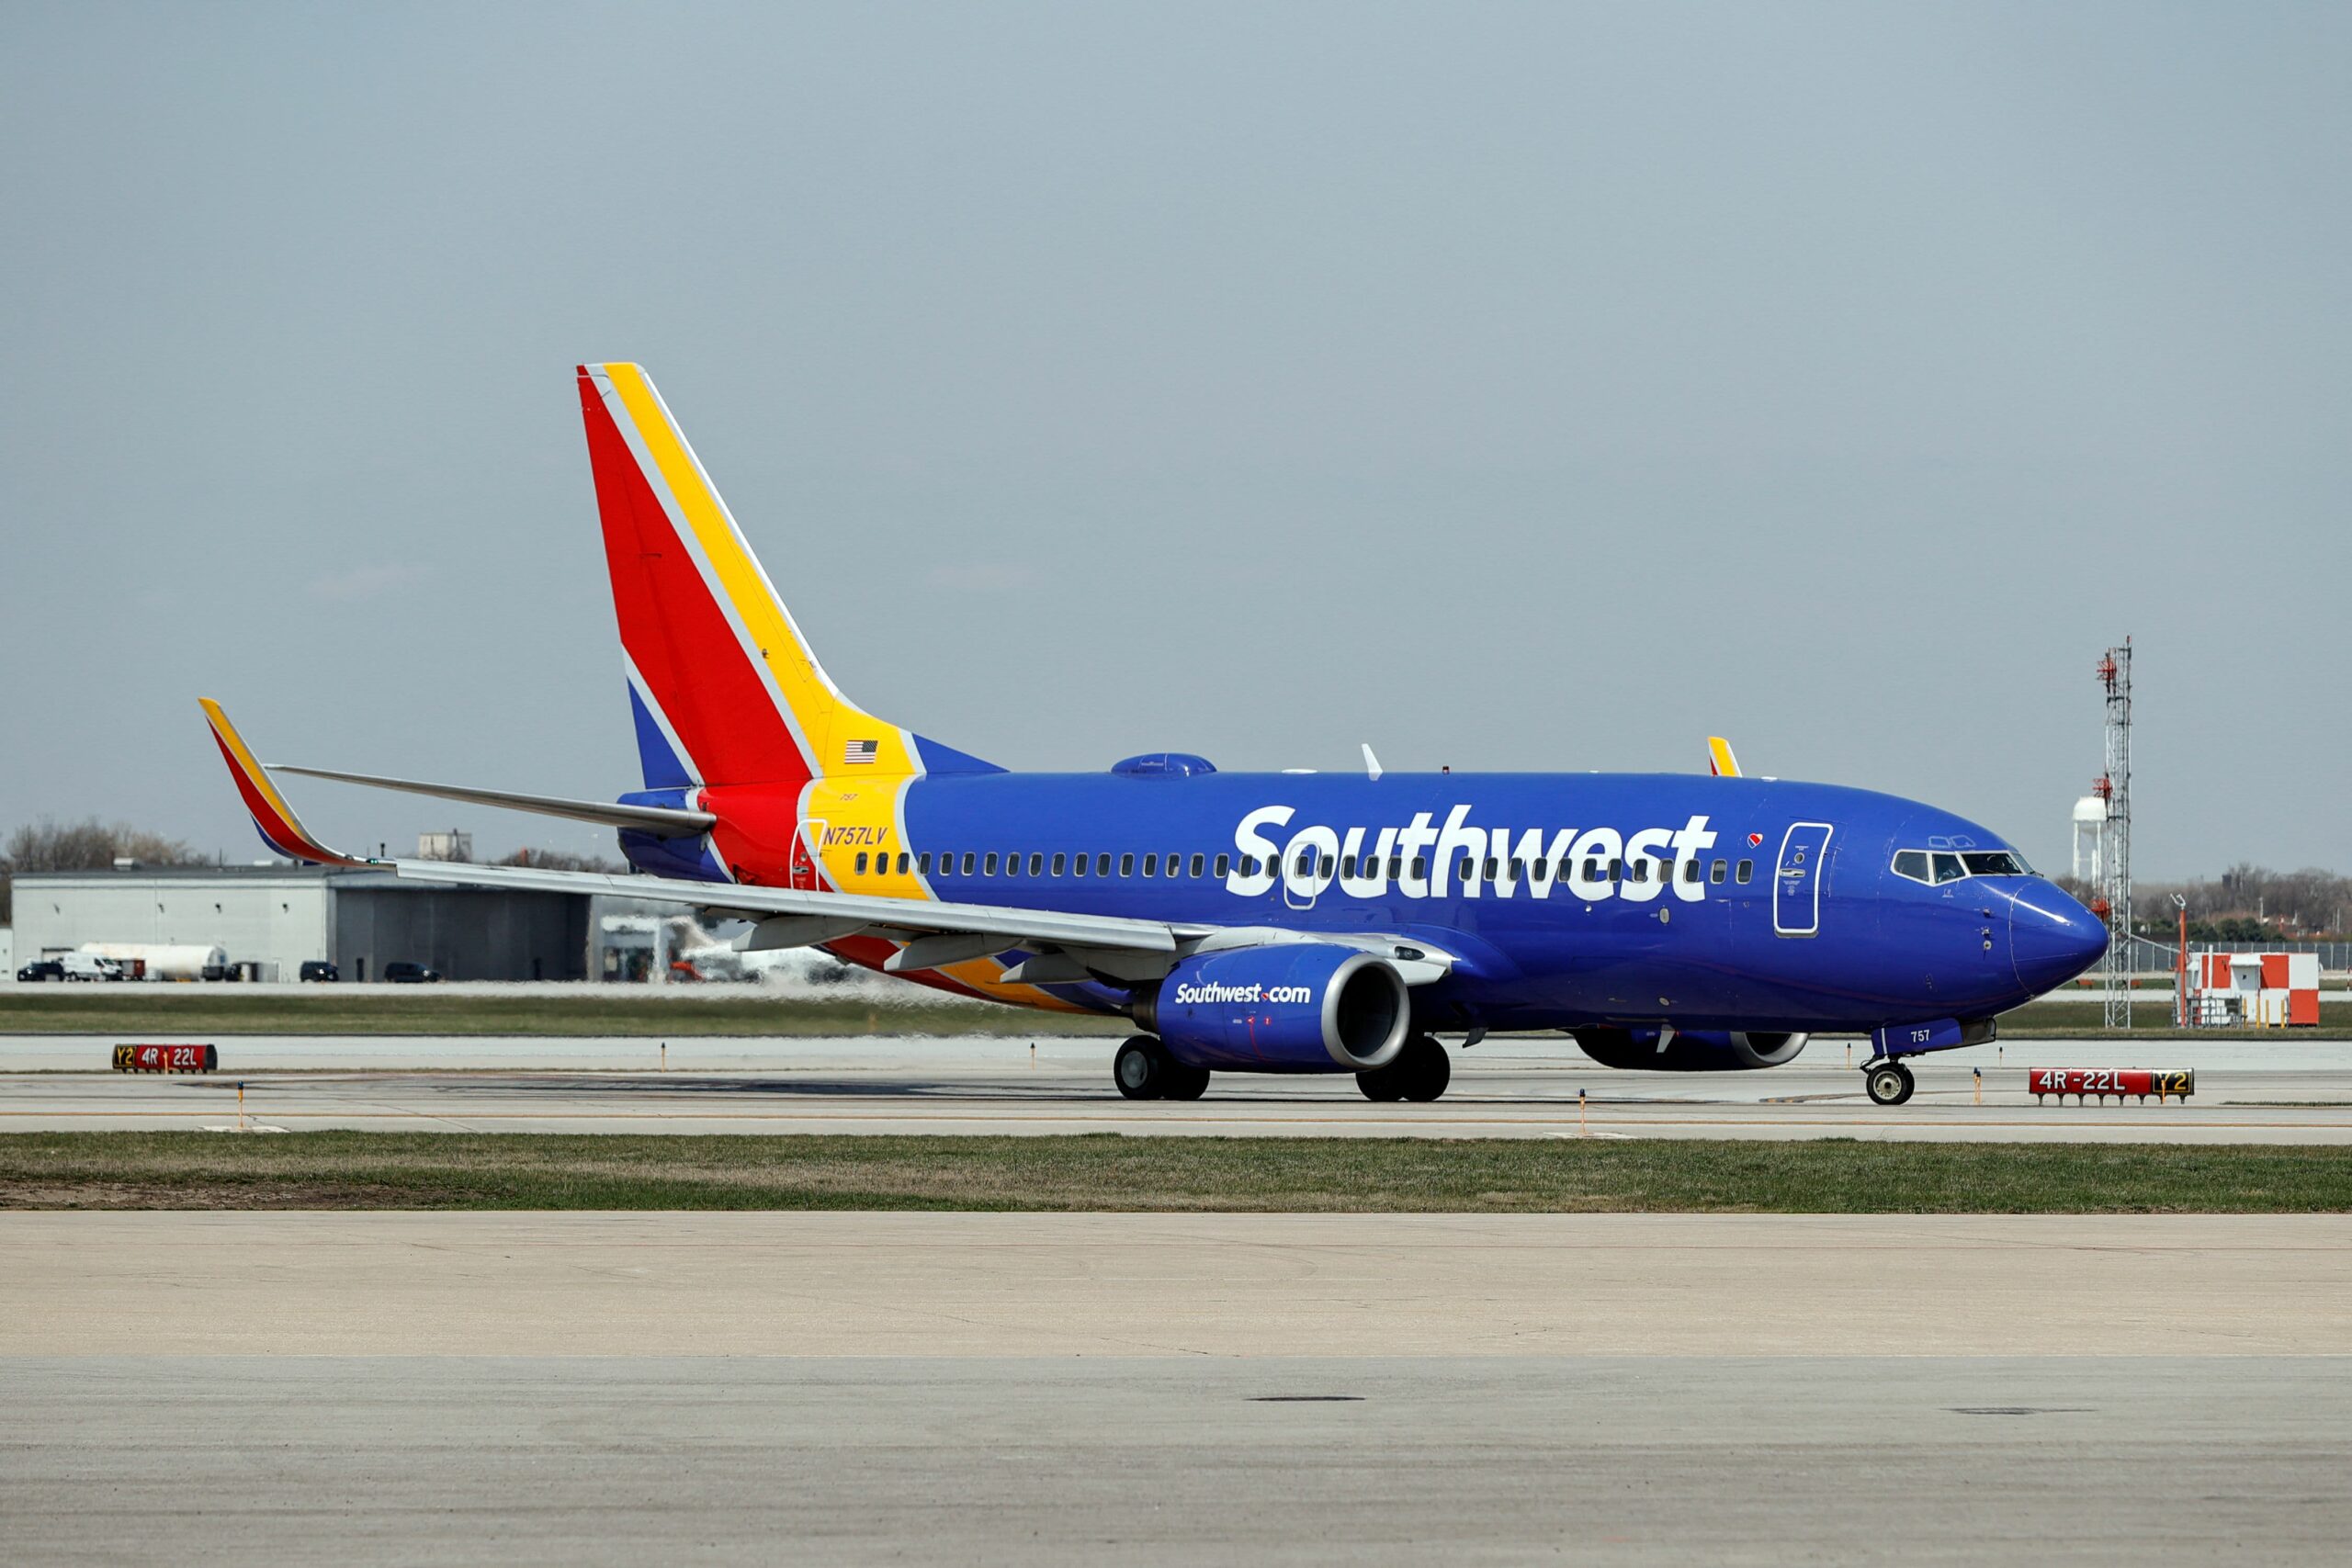 Southwest weighs schedule modifications, apologizes to workers after complaints